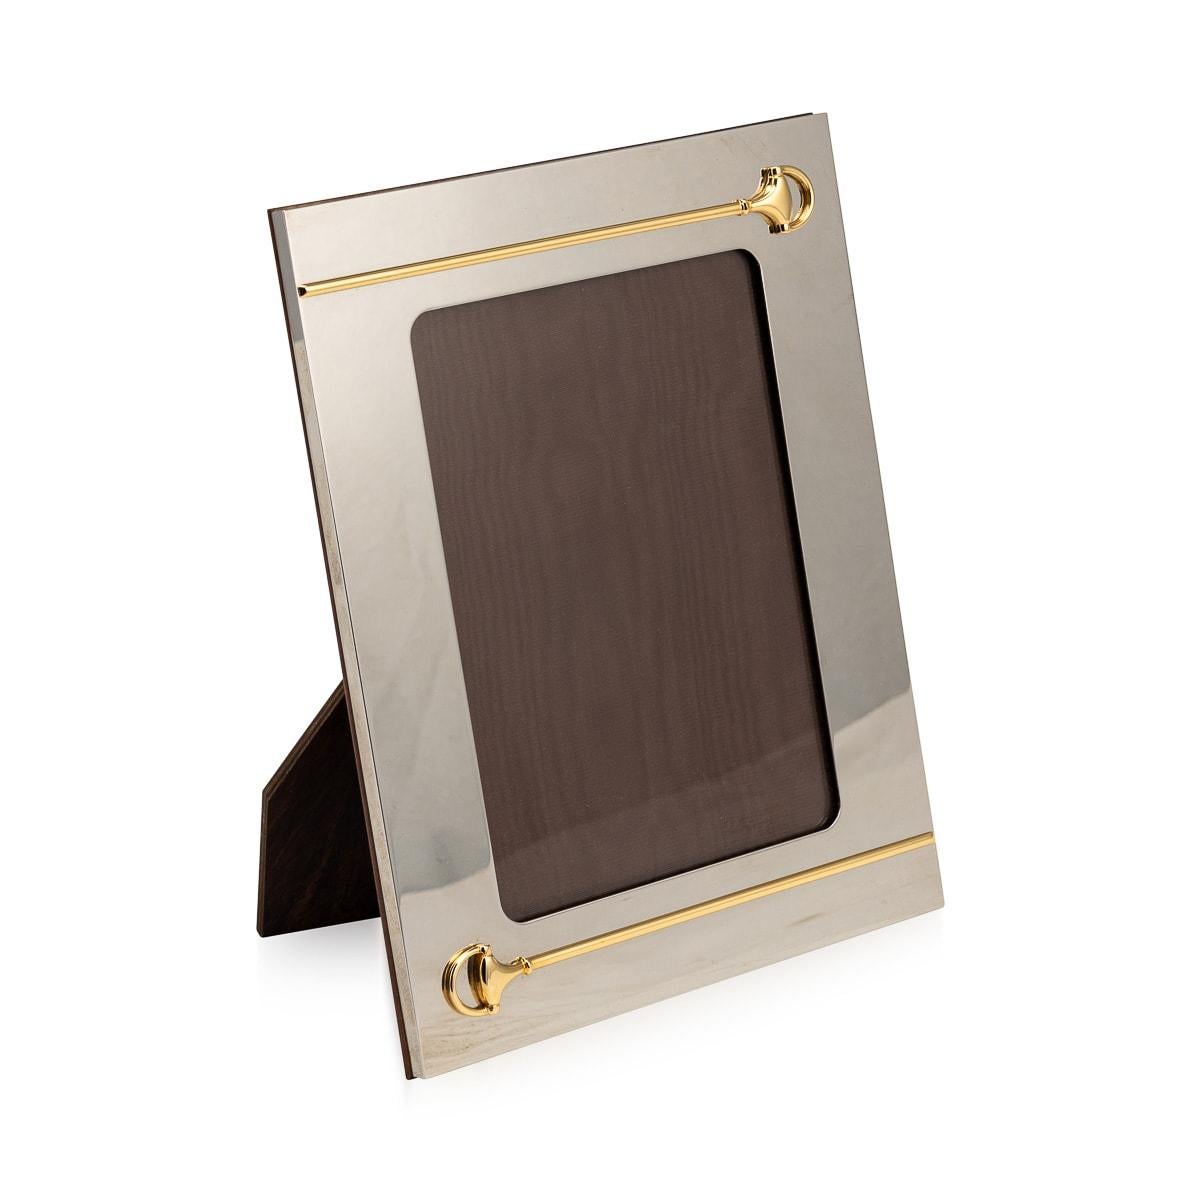 Modern 20th Century Silver Plated Gucci Photograph Frame, Italy c.1980